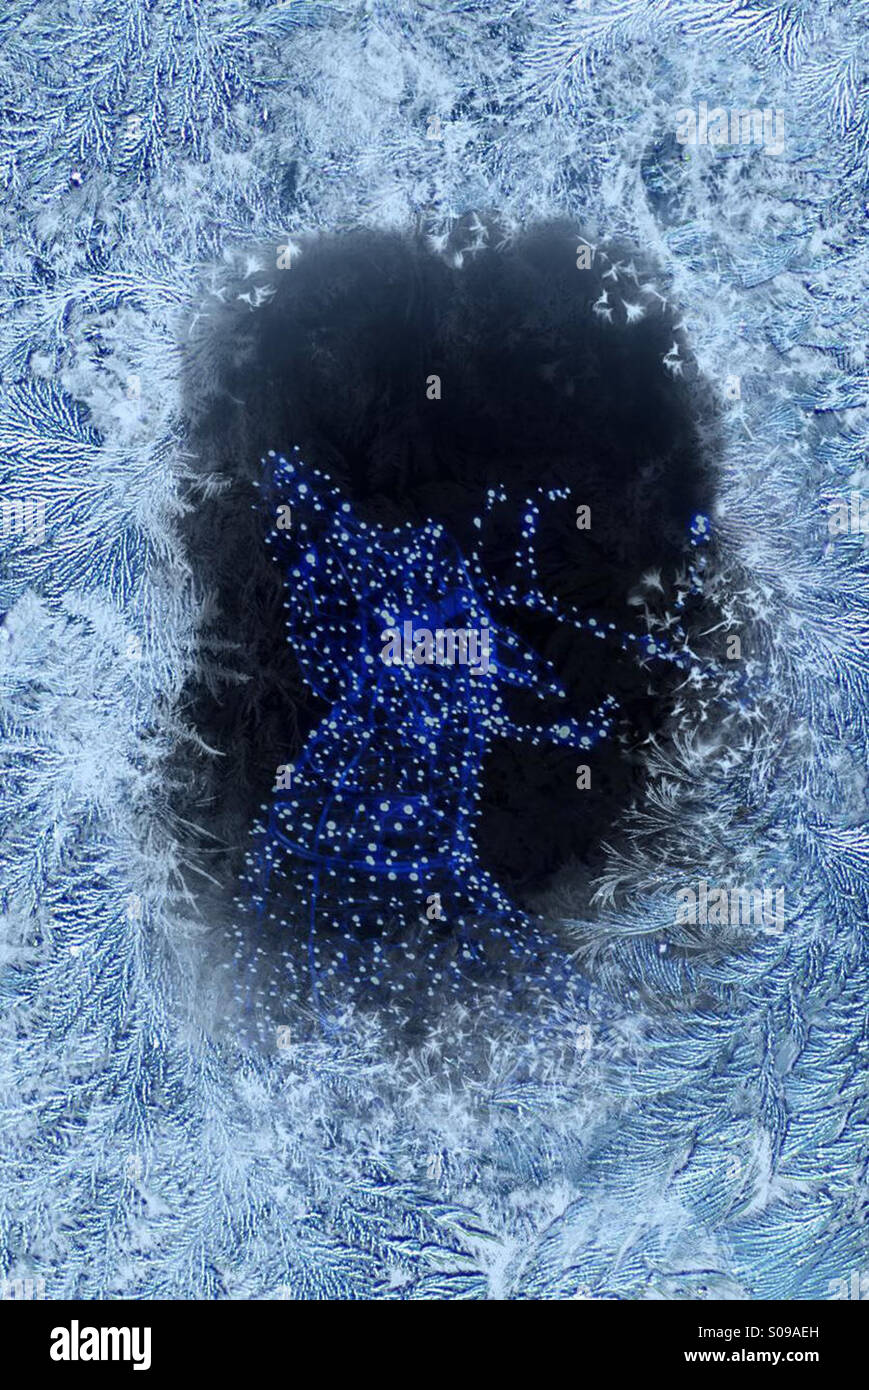 Reindeer head in blue lights with ice effect surround Stock Photo